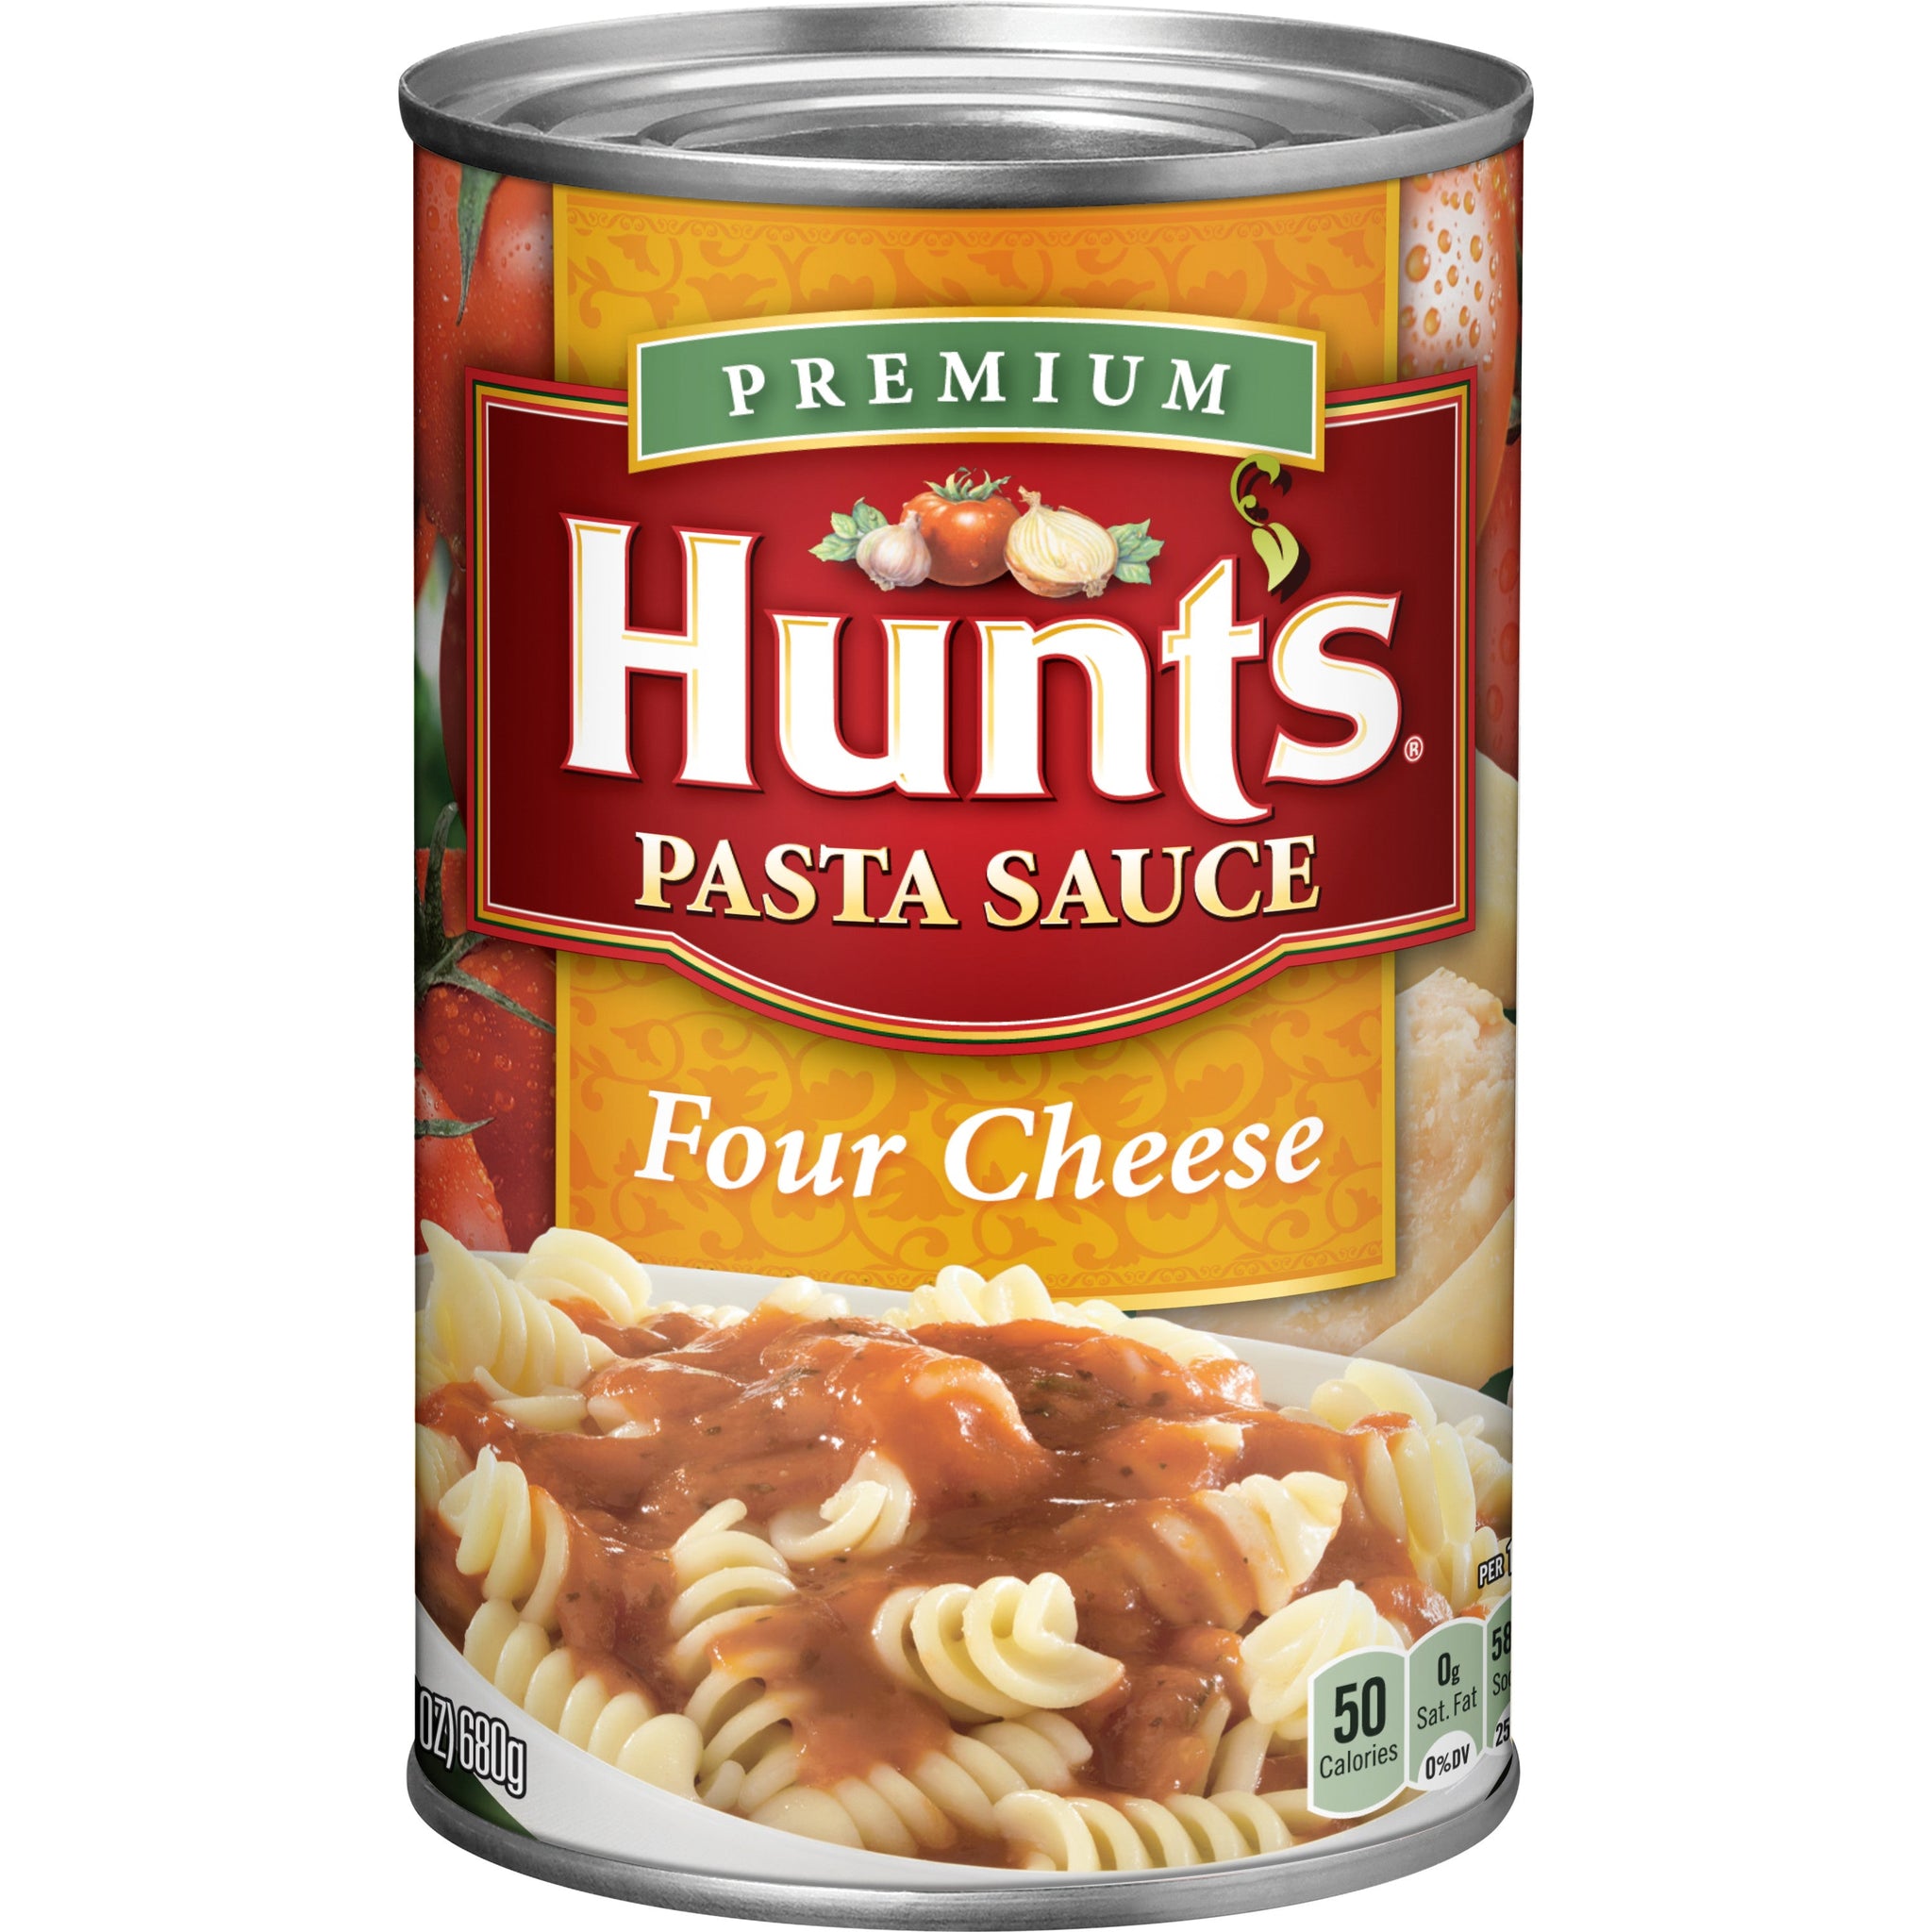 gre>Hunts Pasta Sauce - Four Cheese - 24oz